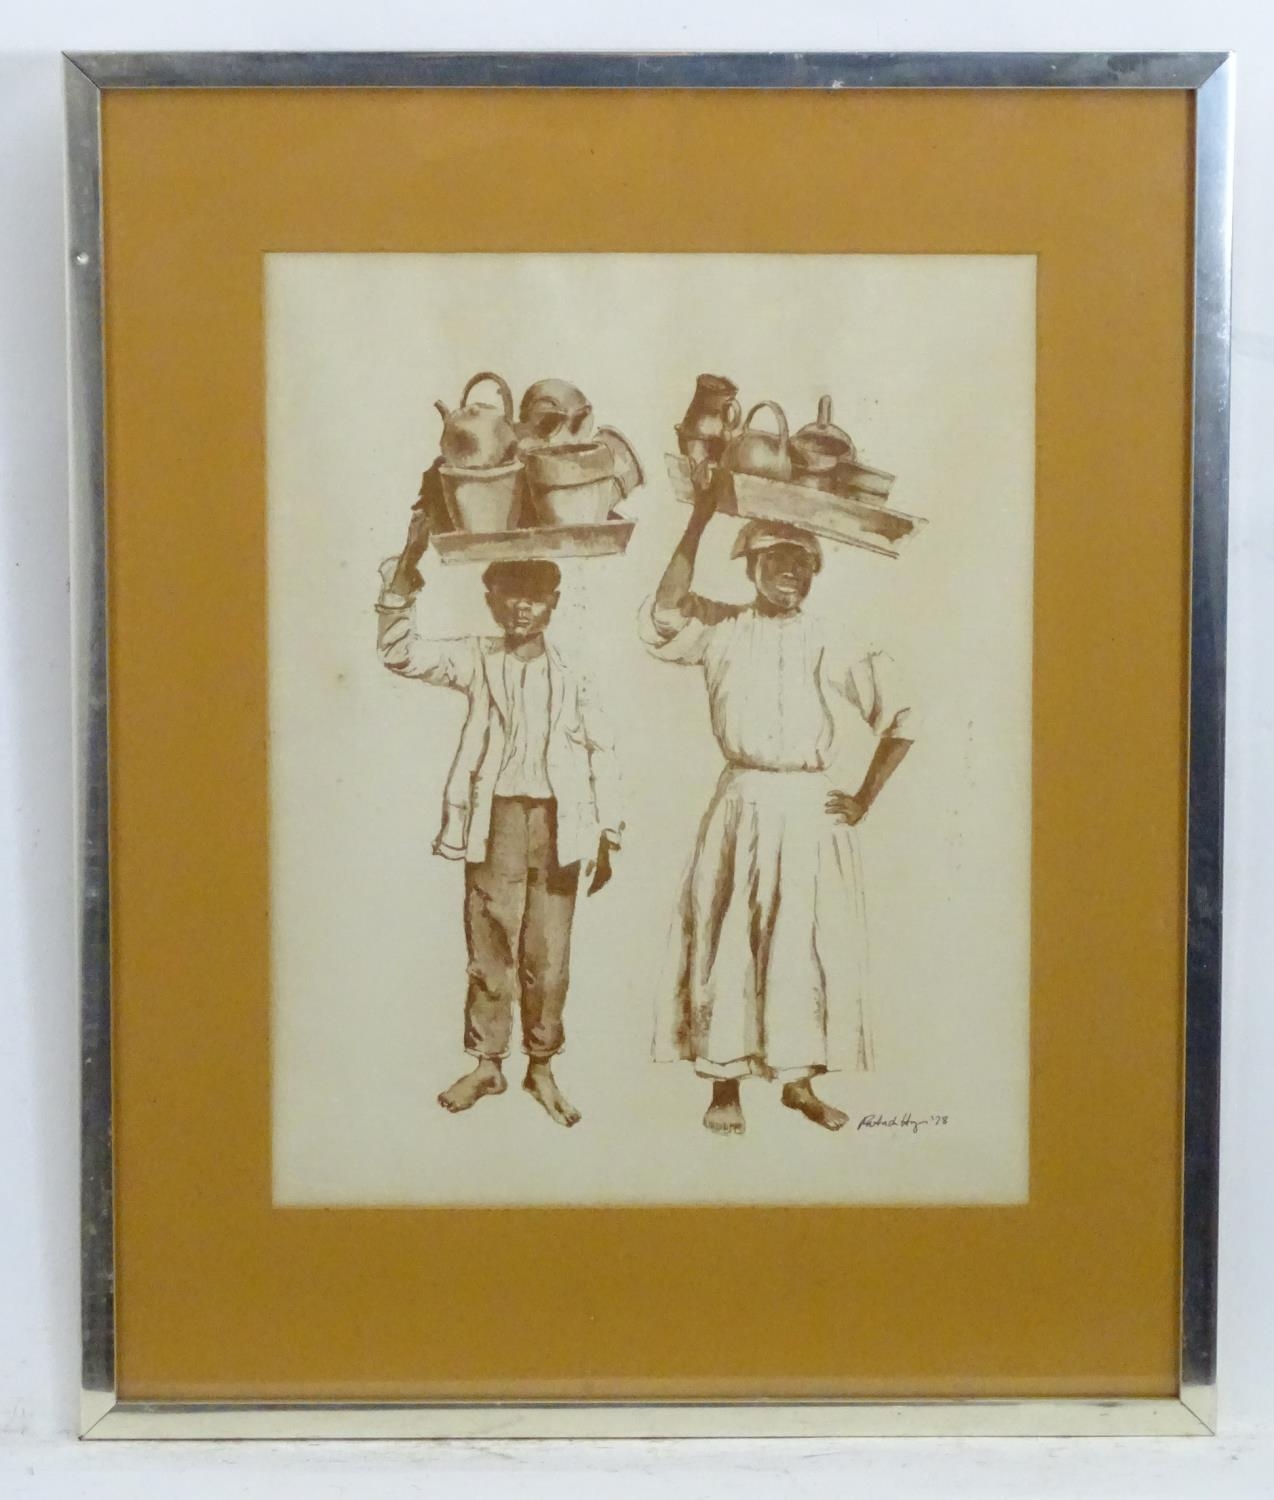 Patrick Hayes, 20th century, Print on textured paper, Two Caribbean figures carrying pots and